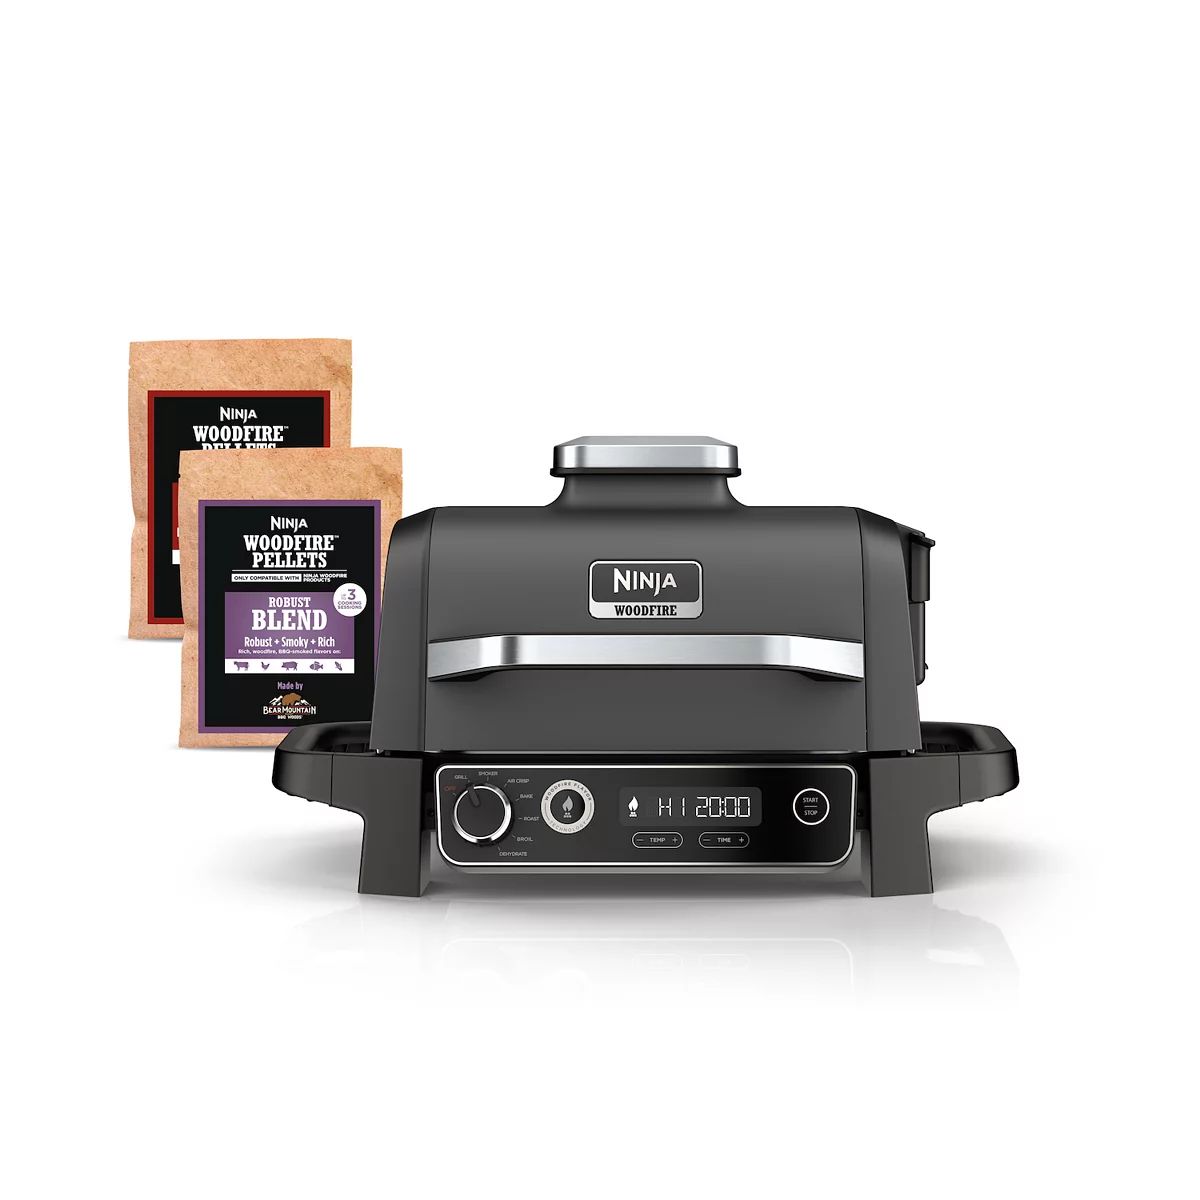 Ninja Woodfire Outdoor Grill & Smoker, 7-in-1 Master Grill, BBQ Smoker & Air Fryer | Kohl's